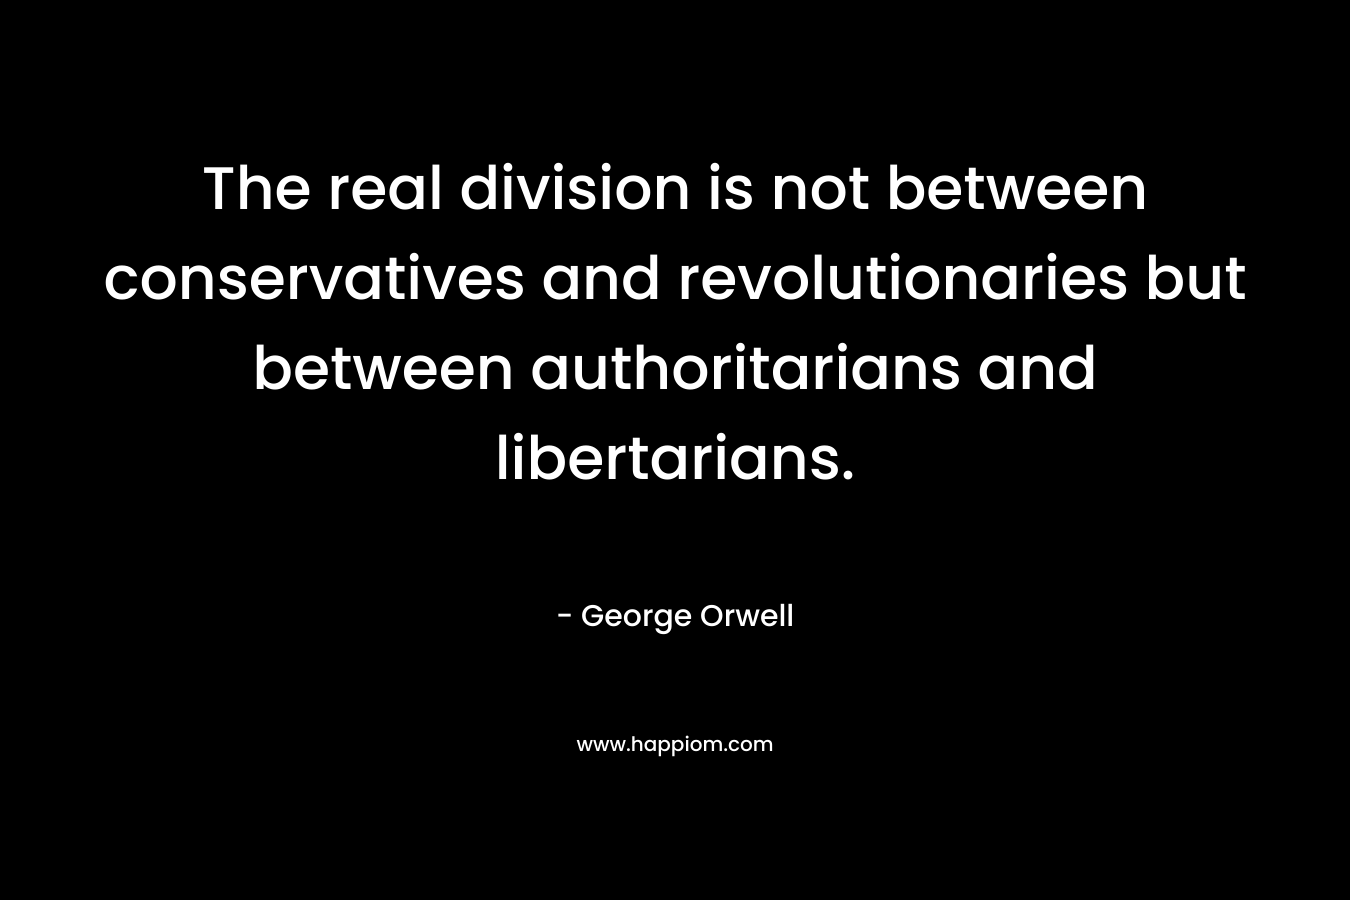 The real division is not between conservatives and revolutionaries but between authoritarians and libertarians. – George Orwell